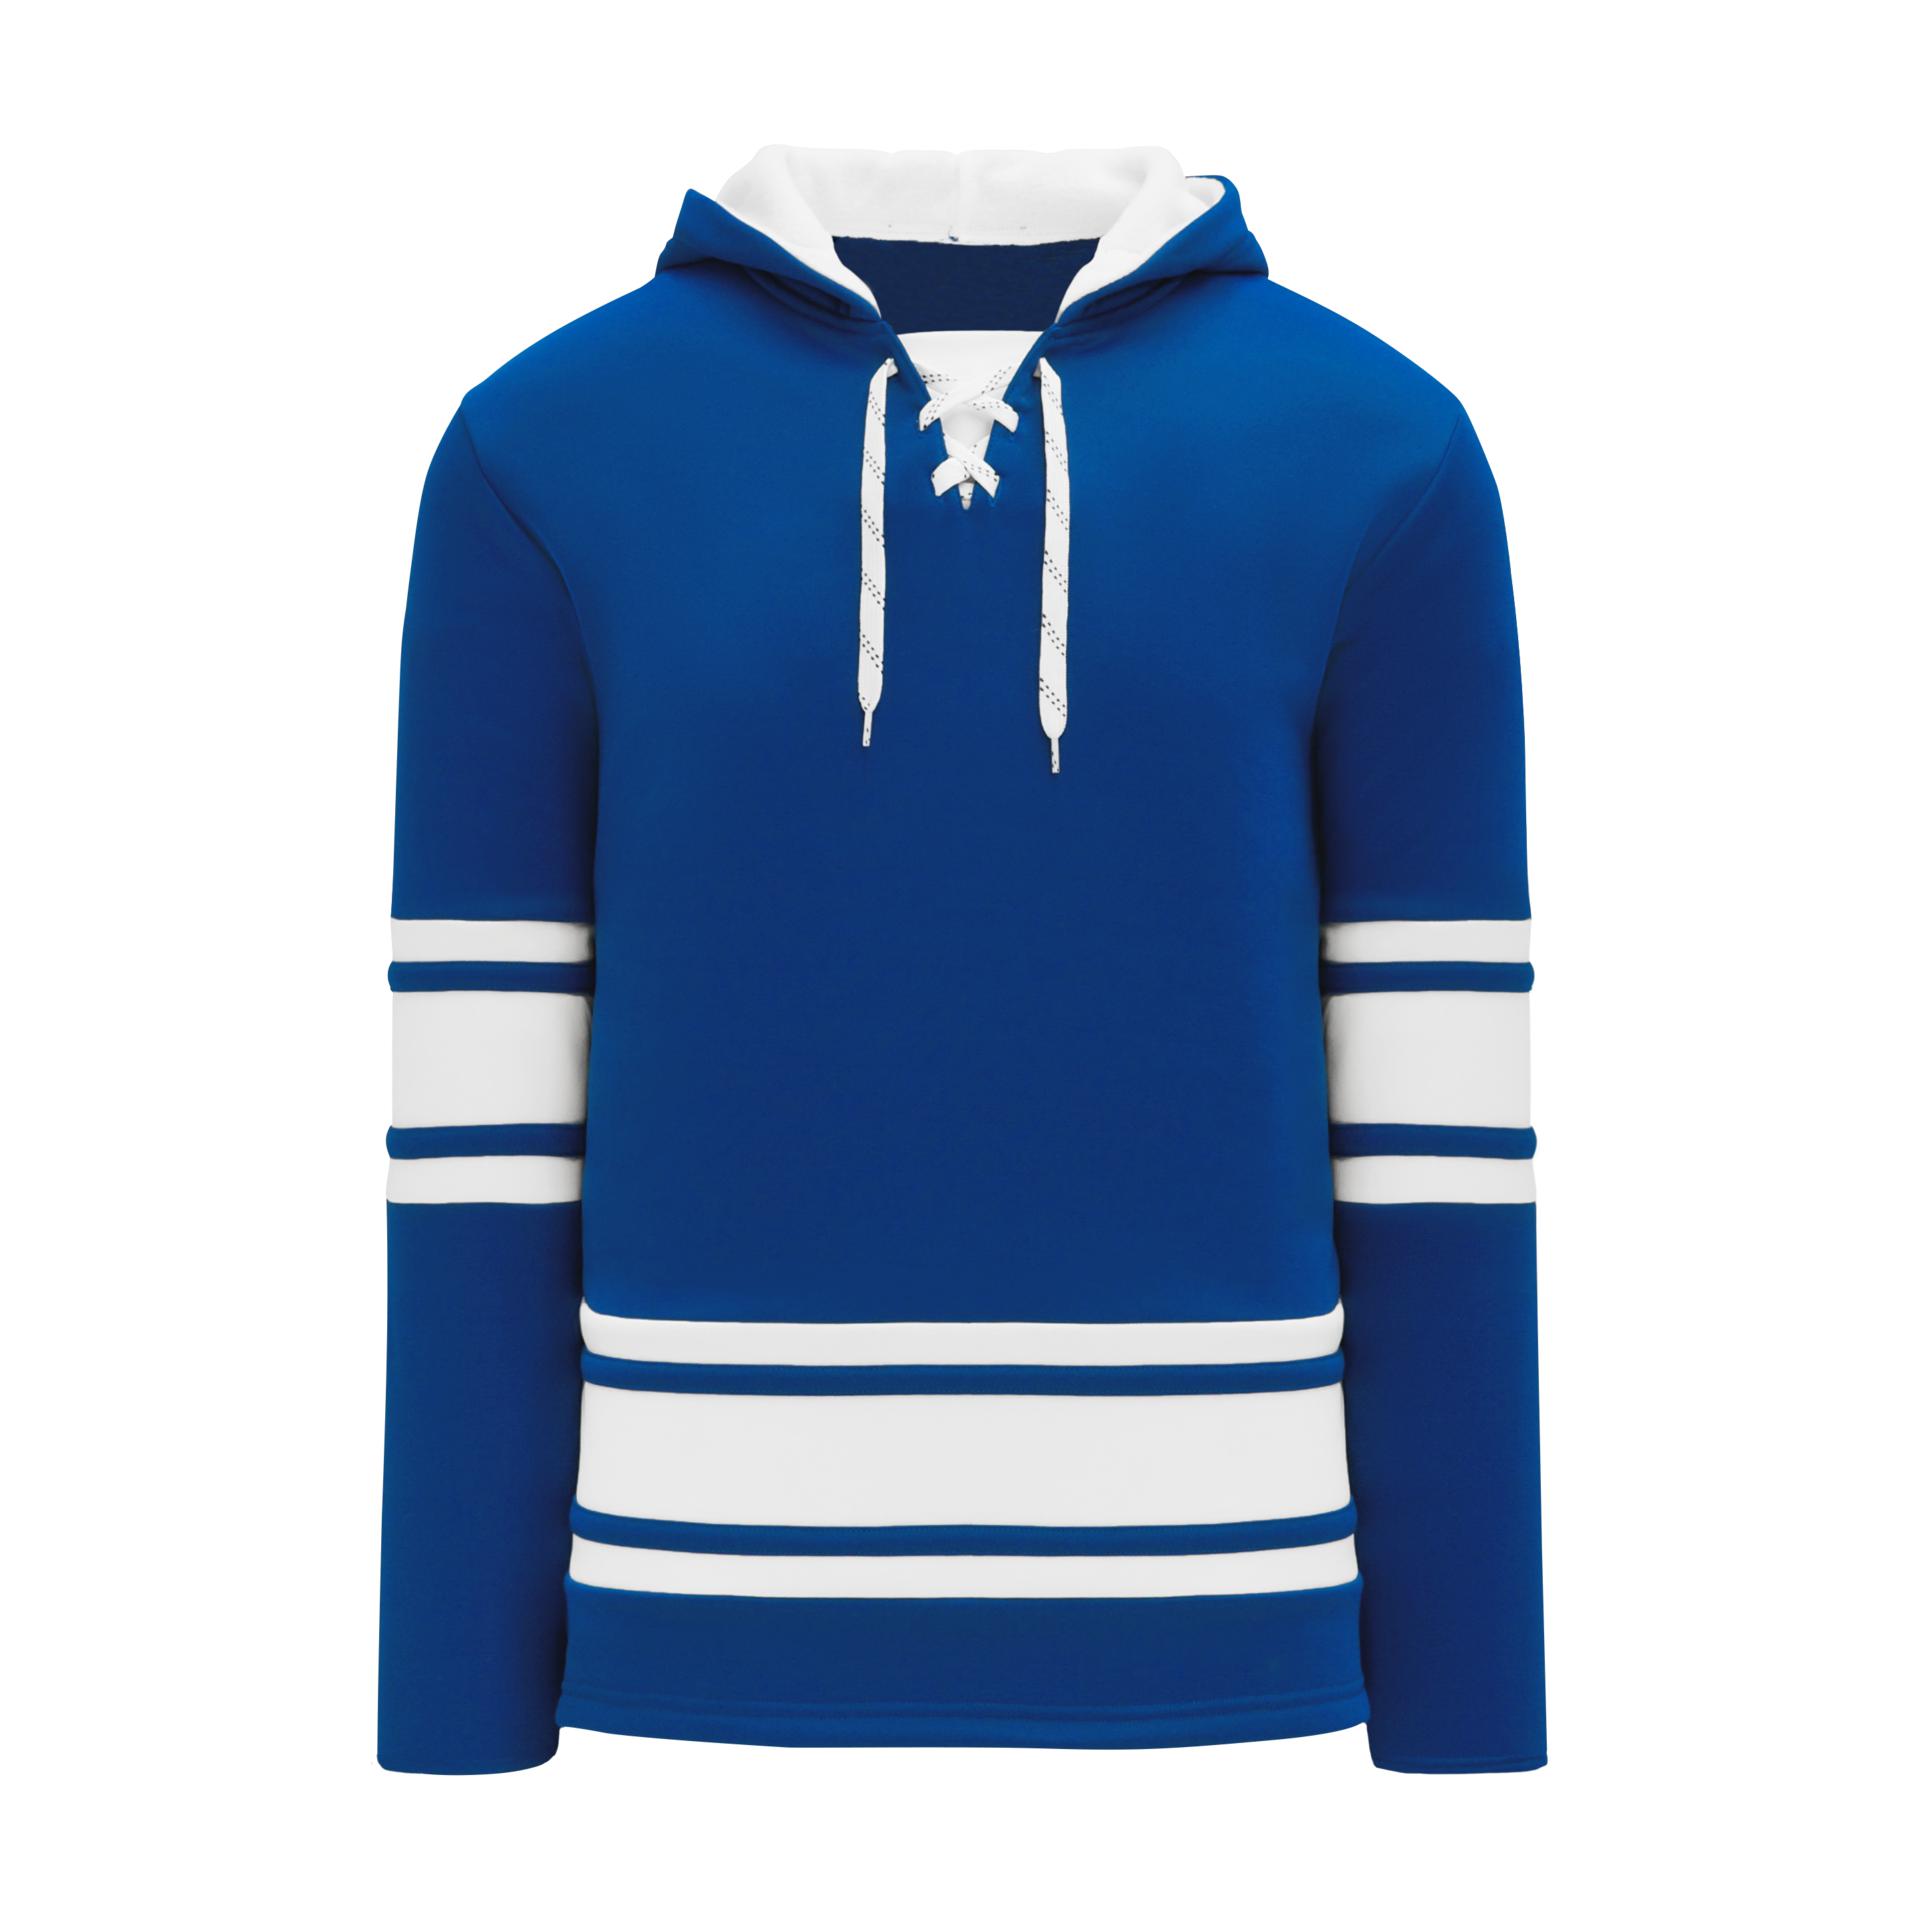 Toronto Maple Leafs Merchandise Products - Bargains Group